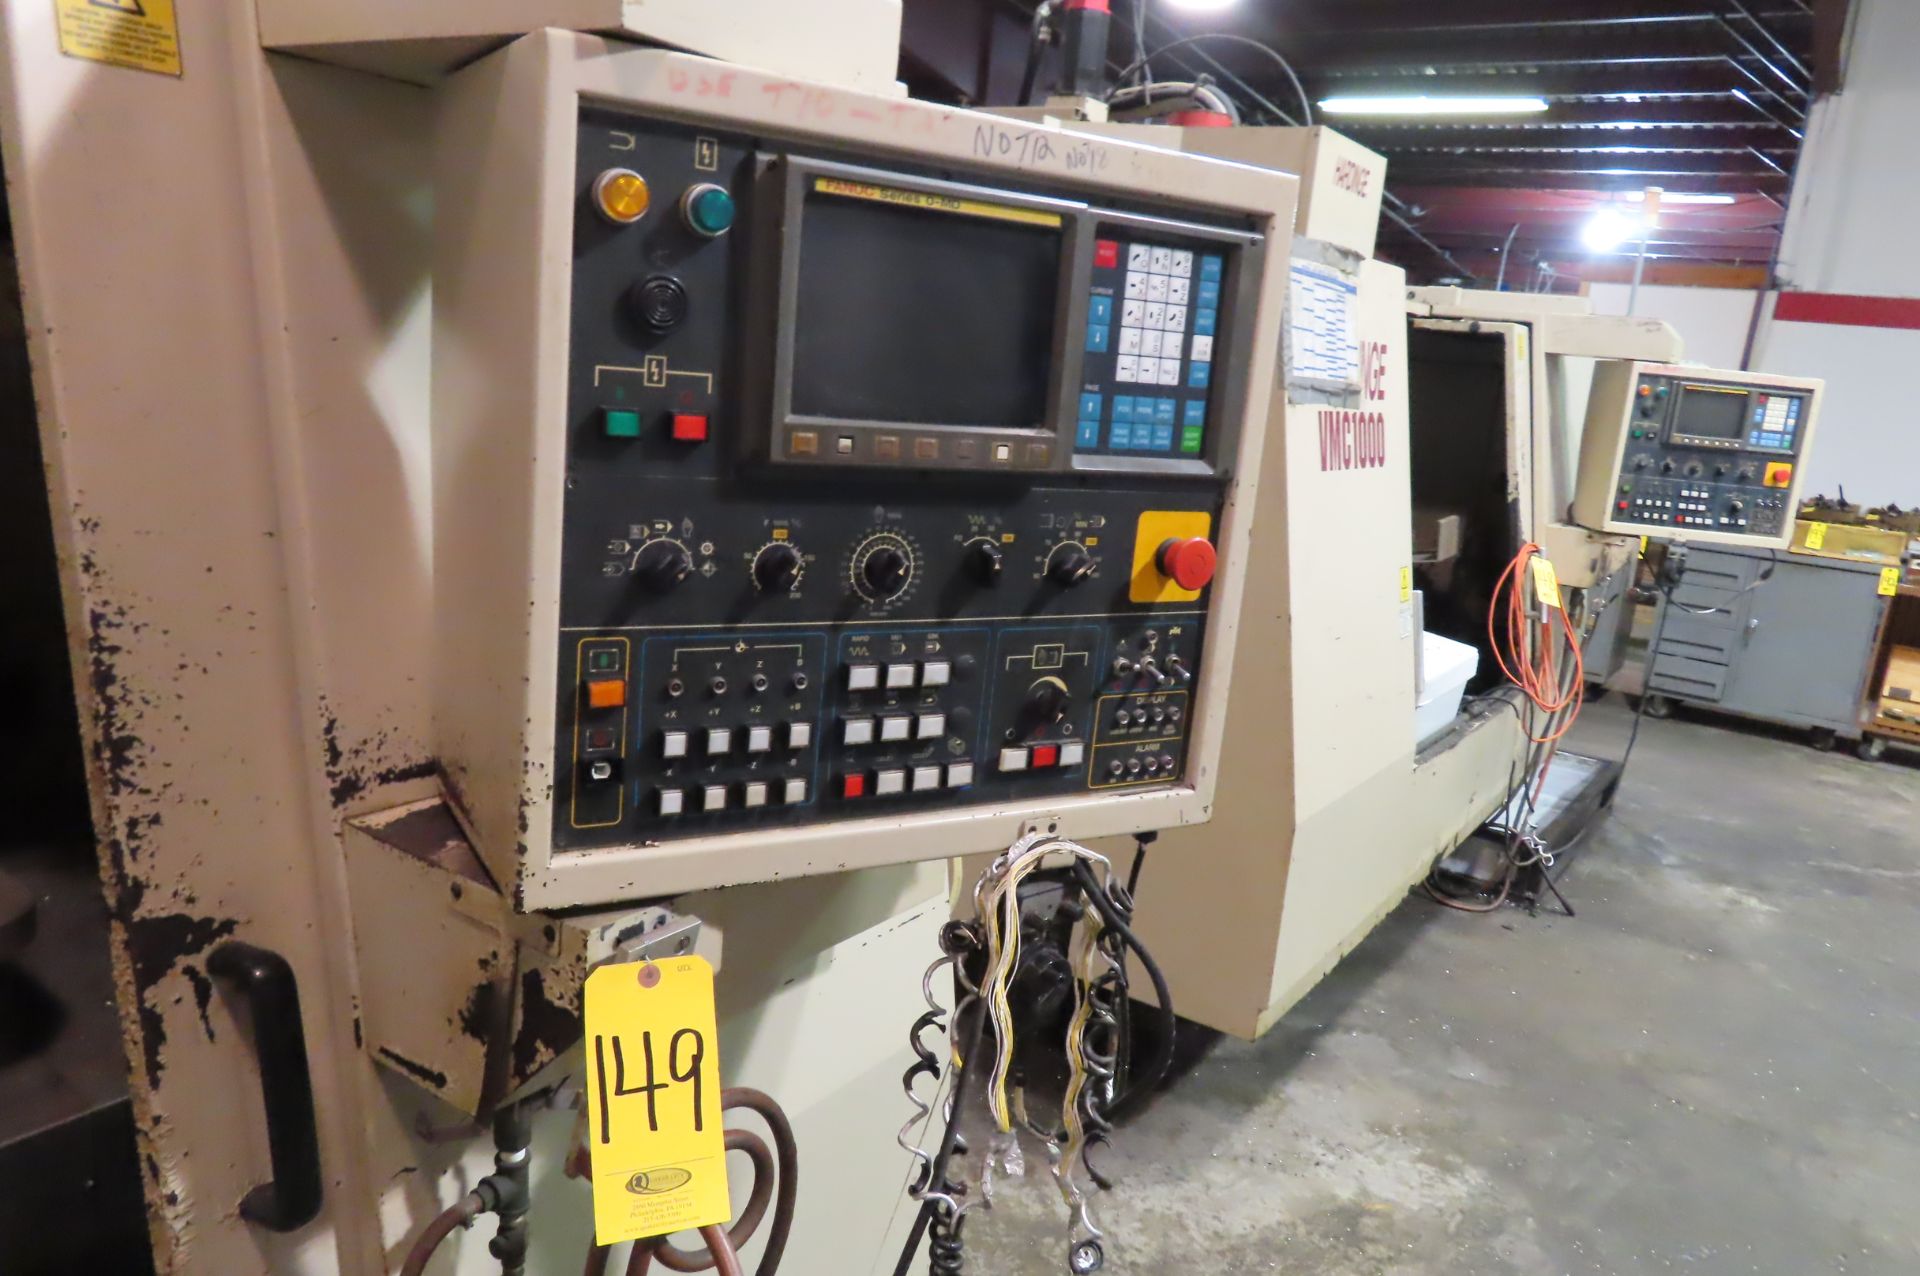 HARDINGE VMC 1000 CNC VERTICAL MACHINING CENTER, S/N MM-121 (AS IS) - Image 6 of 8